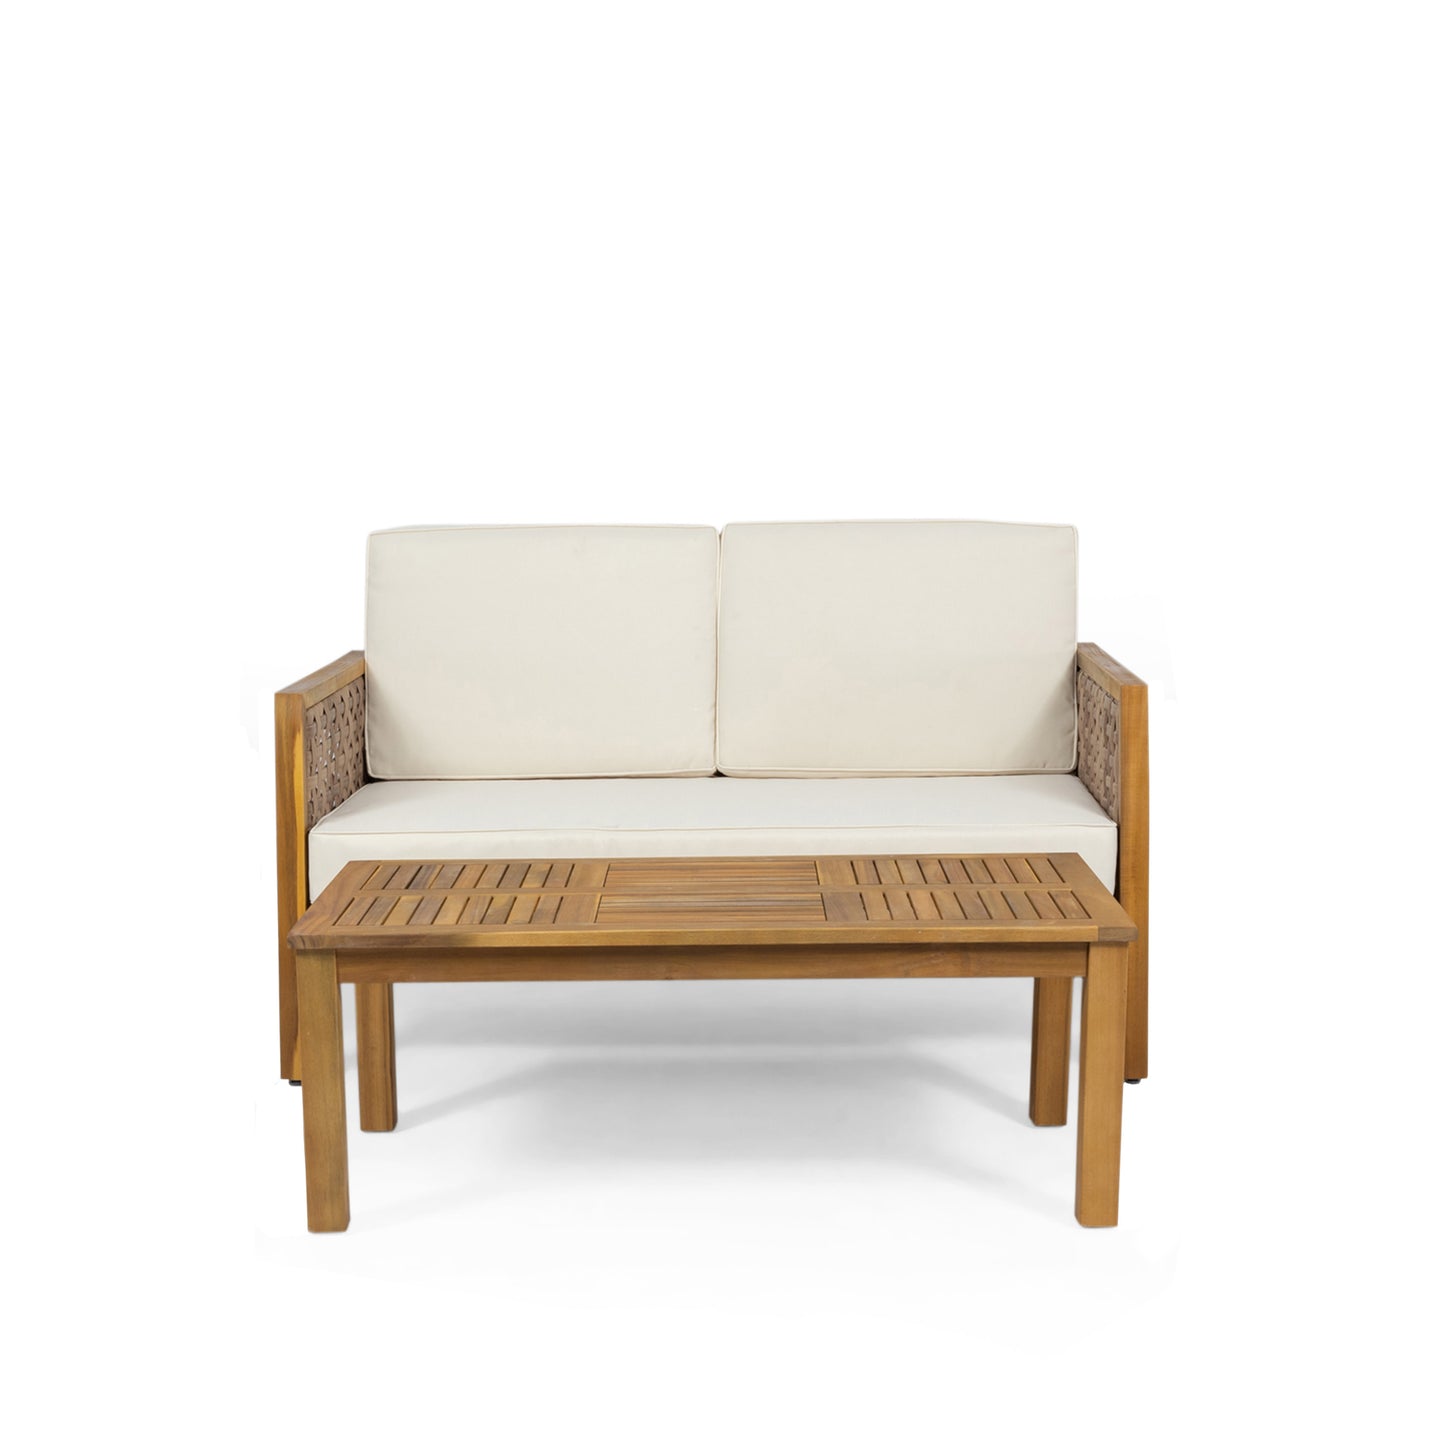 Maycen Outdoor Acacia Wood and Wicker Loveseat and Coffee Table Set with Cushions, Teak, Light Multibrown, Beige